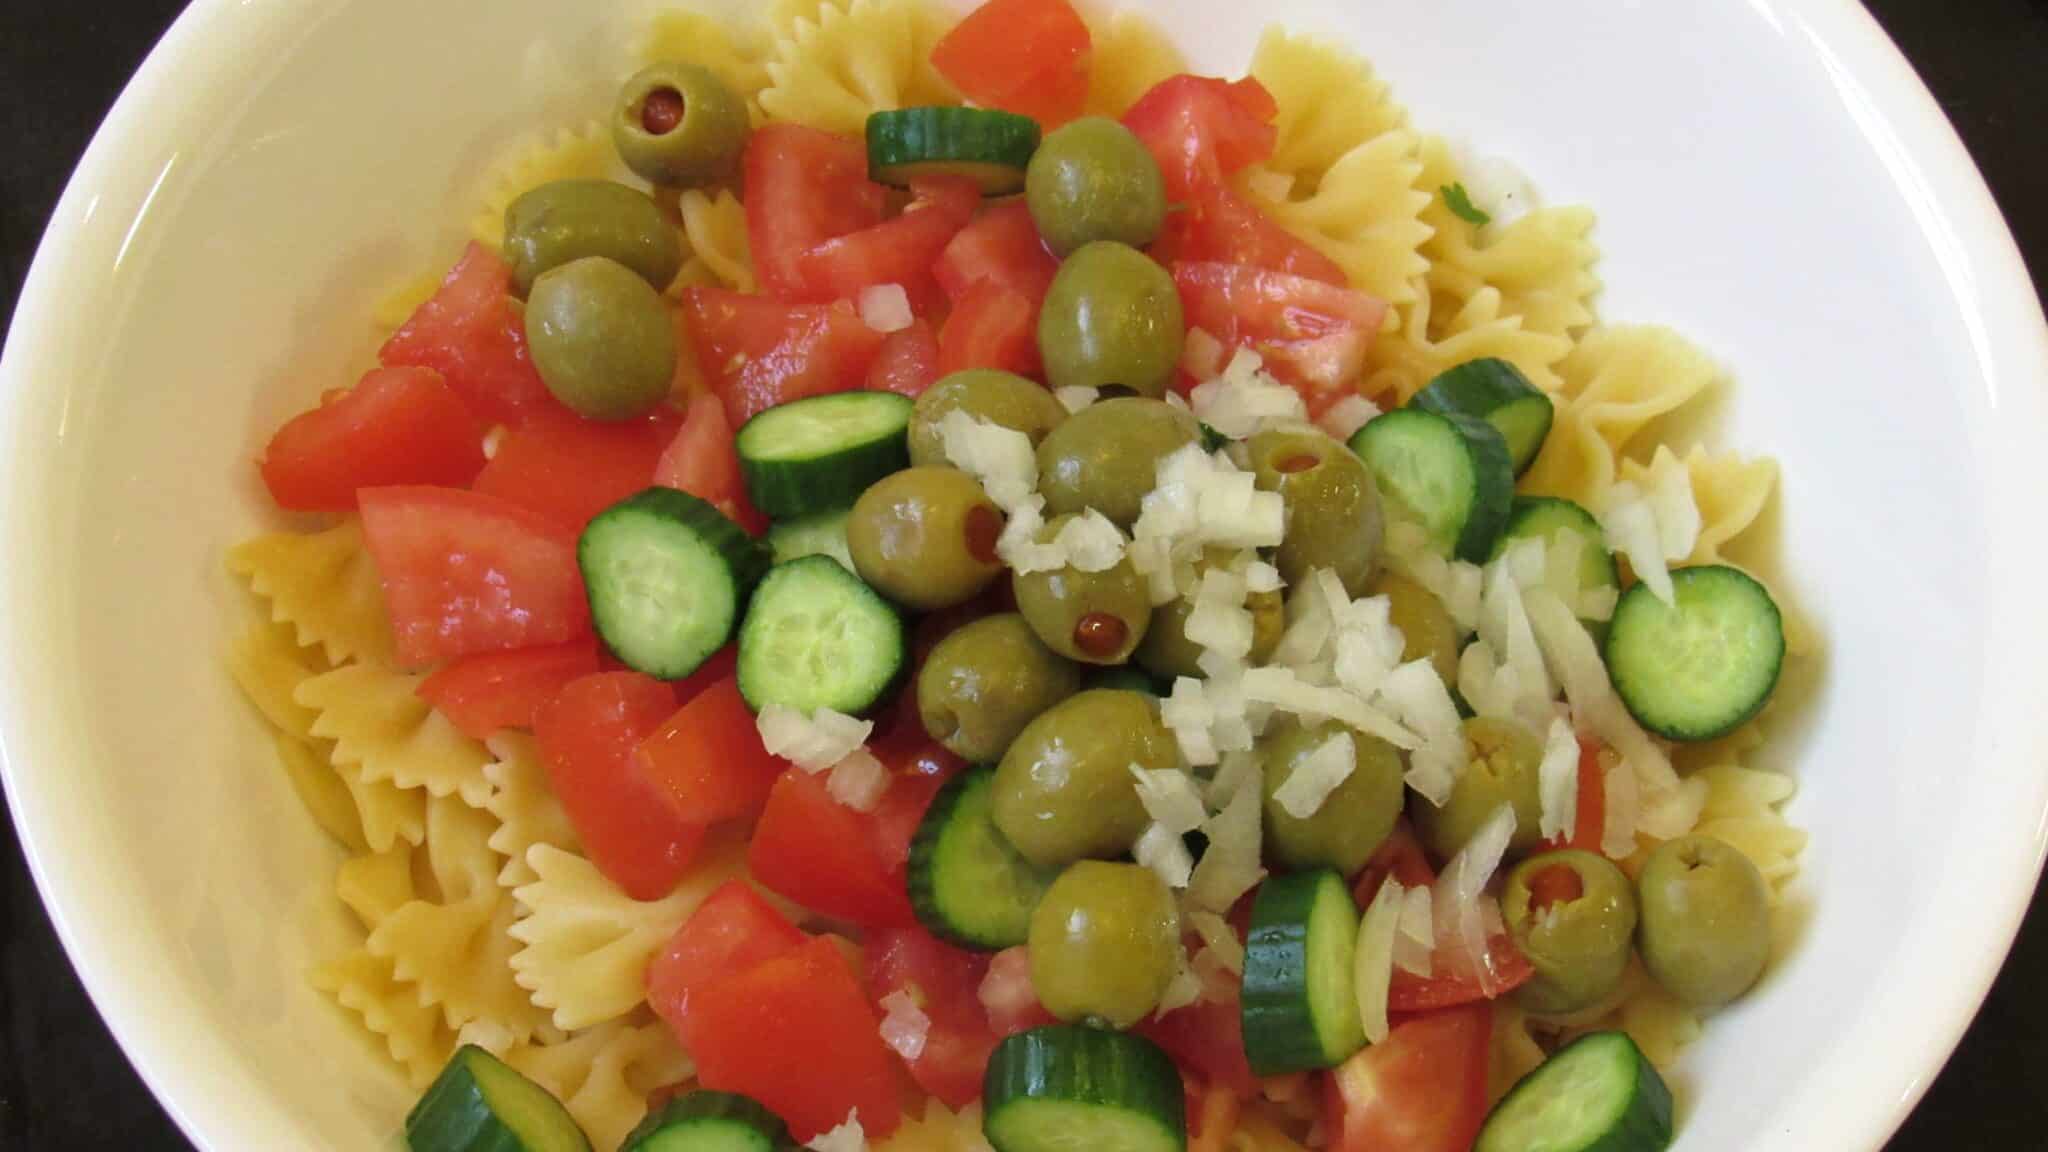 The rest of the ingredients are added to the pasta salad.